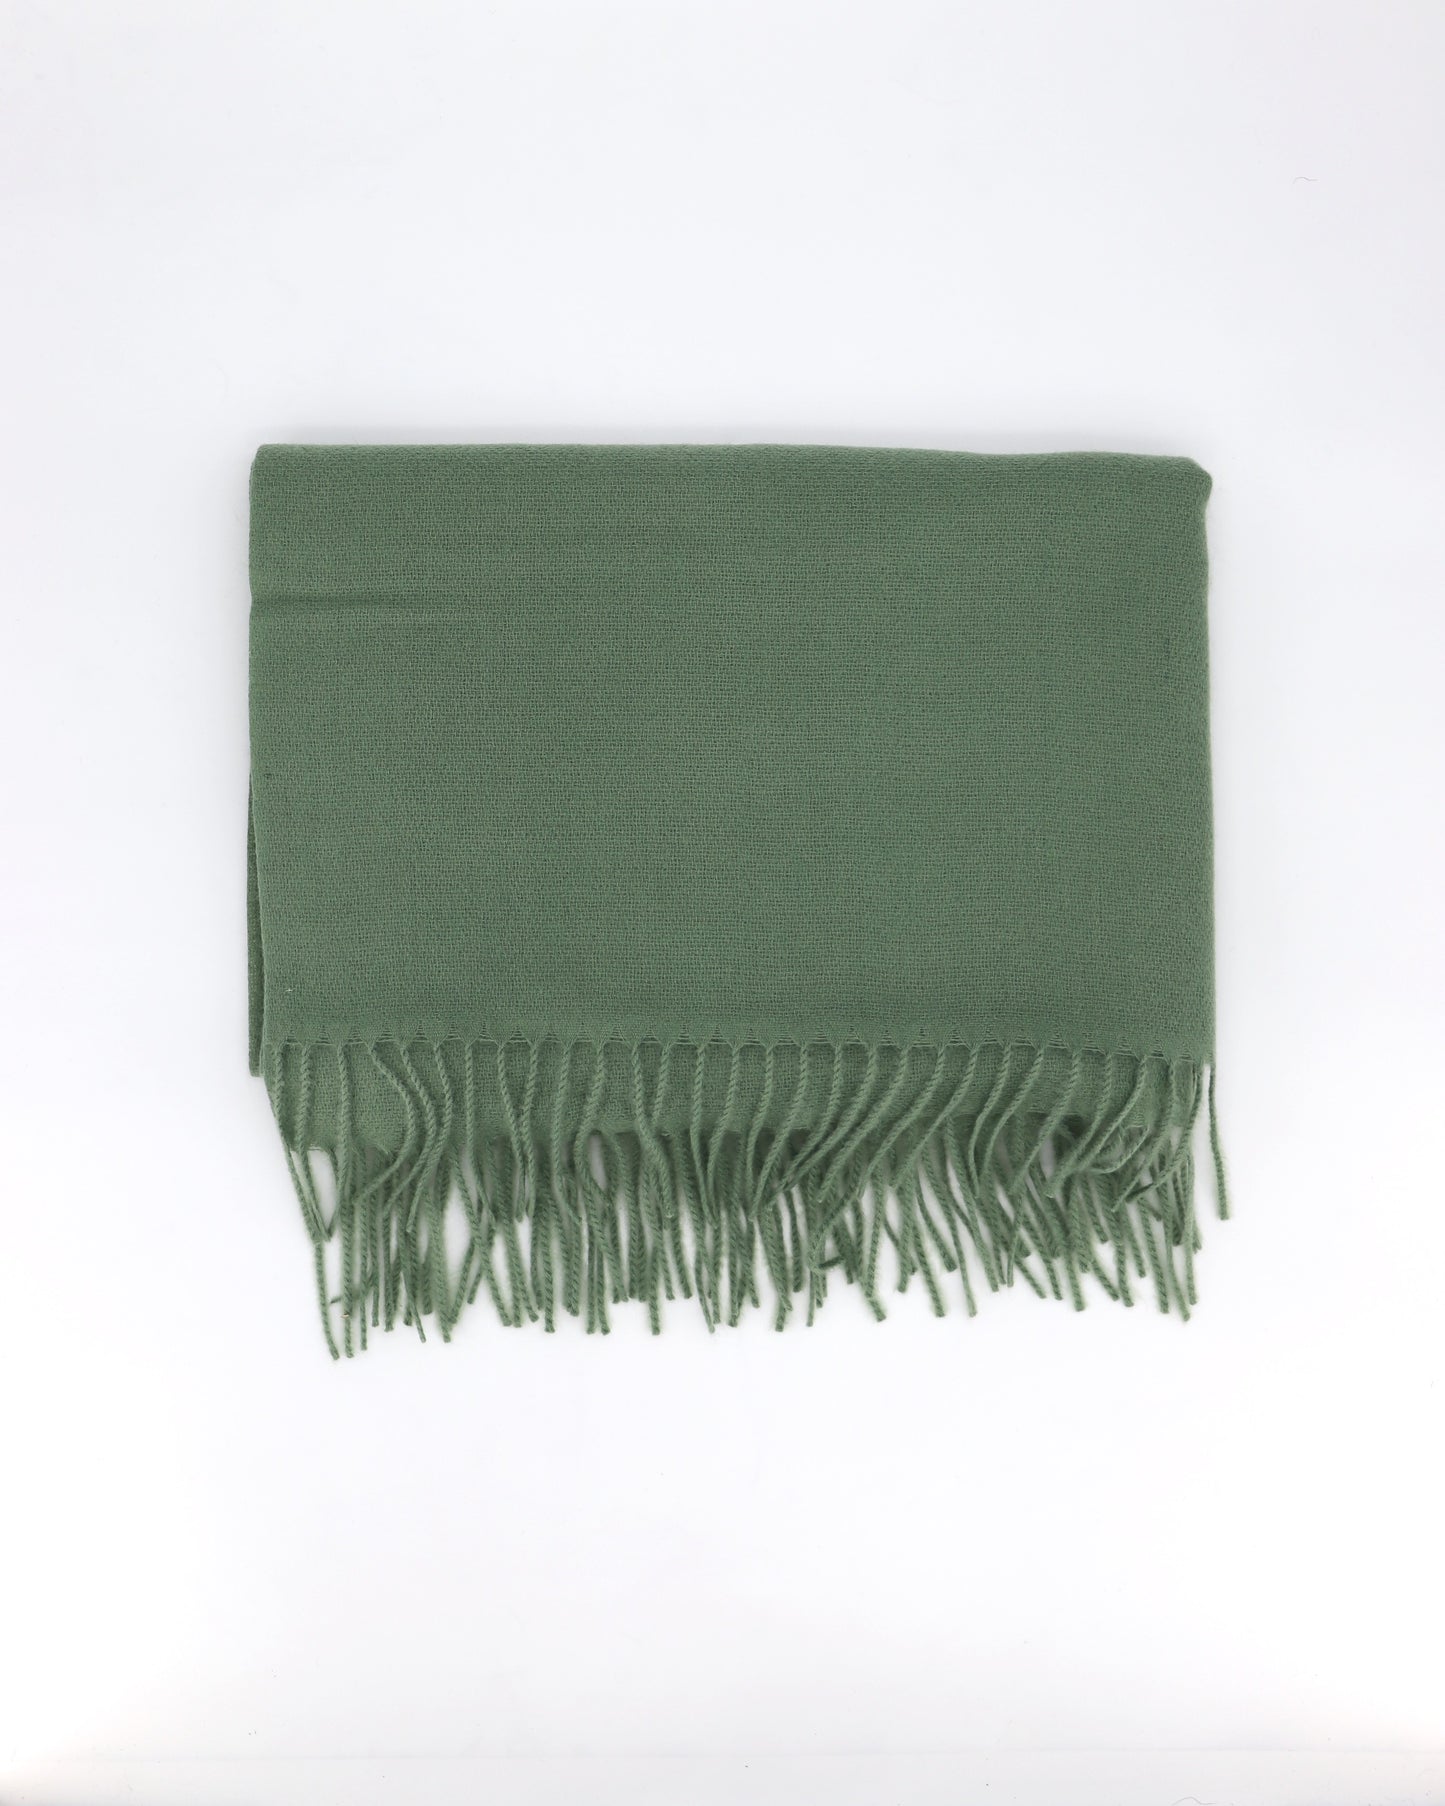 This Scarf is a finest XL-Size soft scarf from Villanelle. A luxurious accessory for women made from the softest wool and cashmere blend for extreme comfort and warmth. It is made in a trendy olive green color for a great look and feeling. A cozy accessory for cold winter, autumn and spring days. This product is sourced and manufactured in Poland.